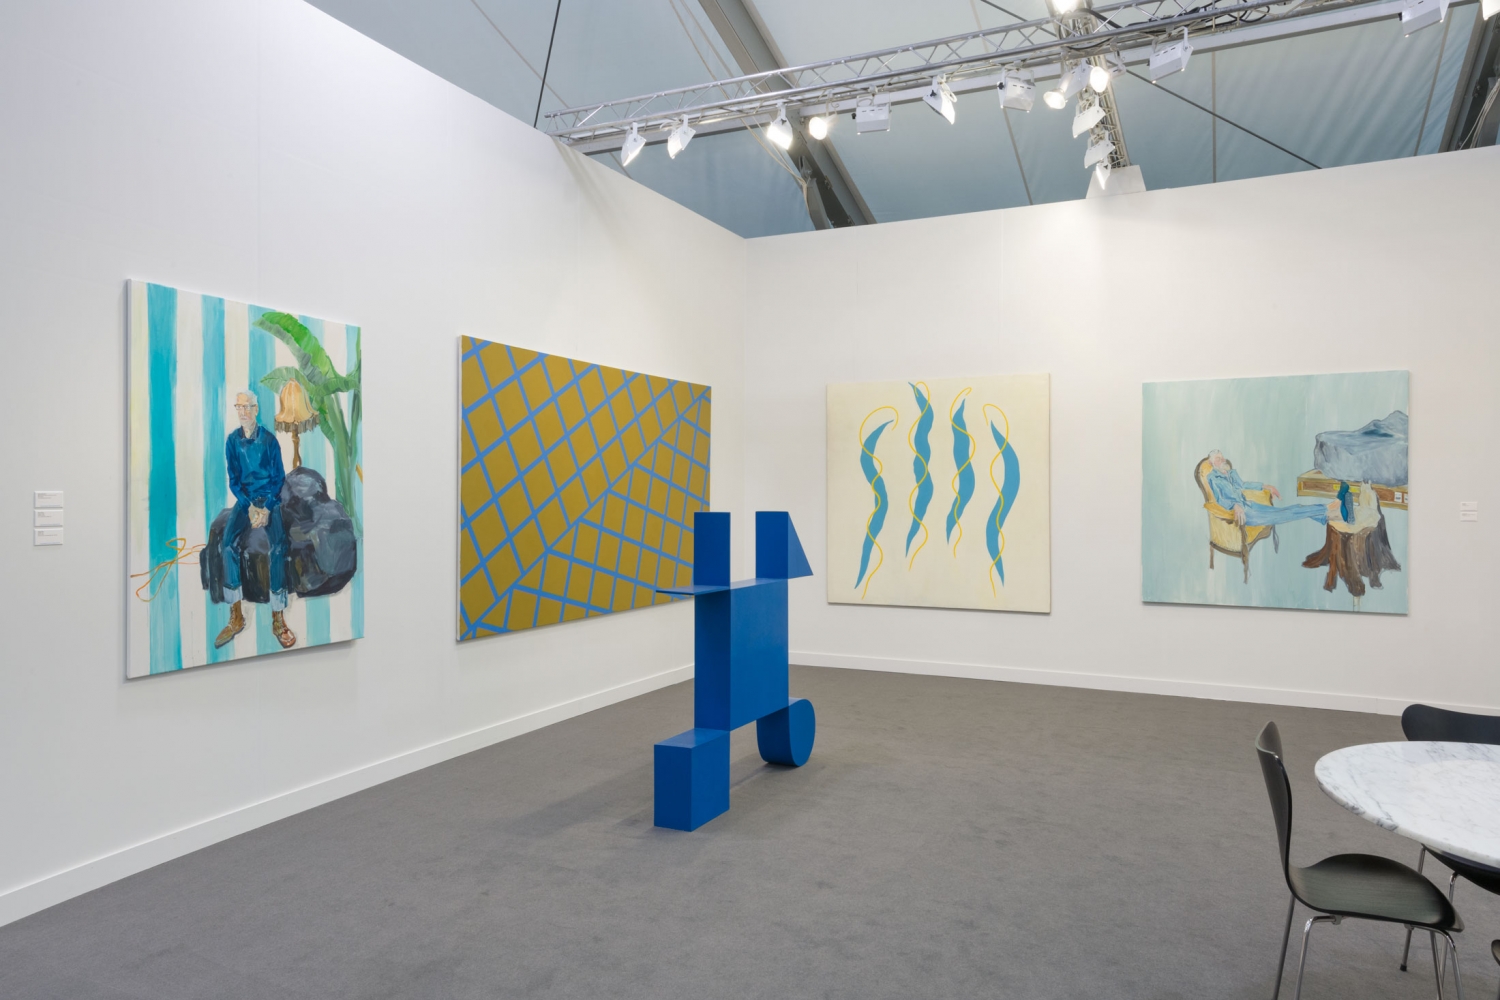 Luhring Augustine

Frieze Los Angeles, Stand D12

Installation view

2019